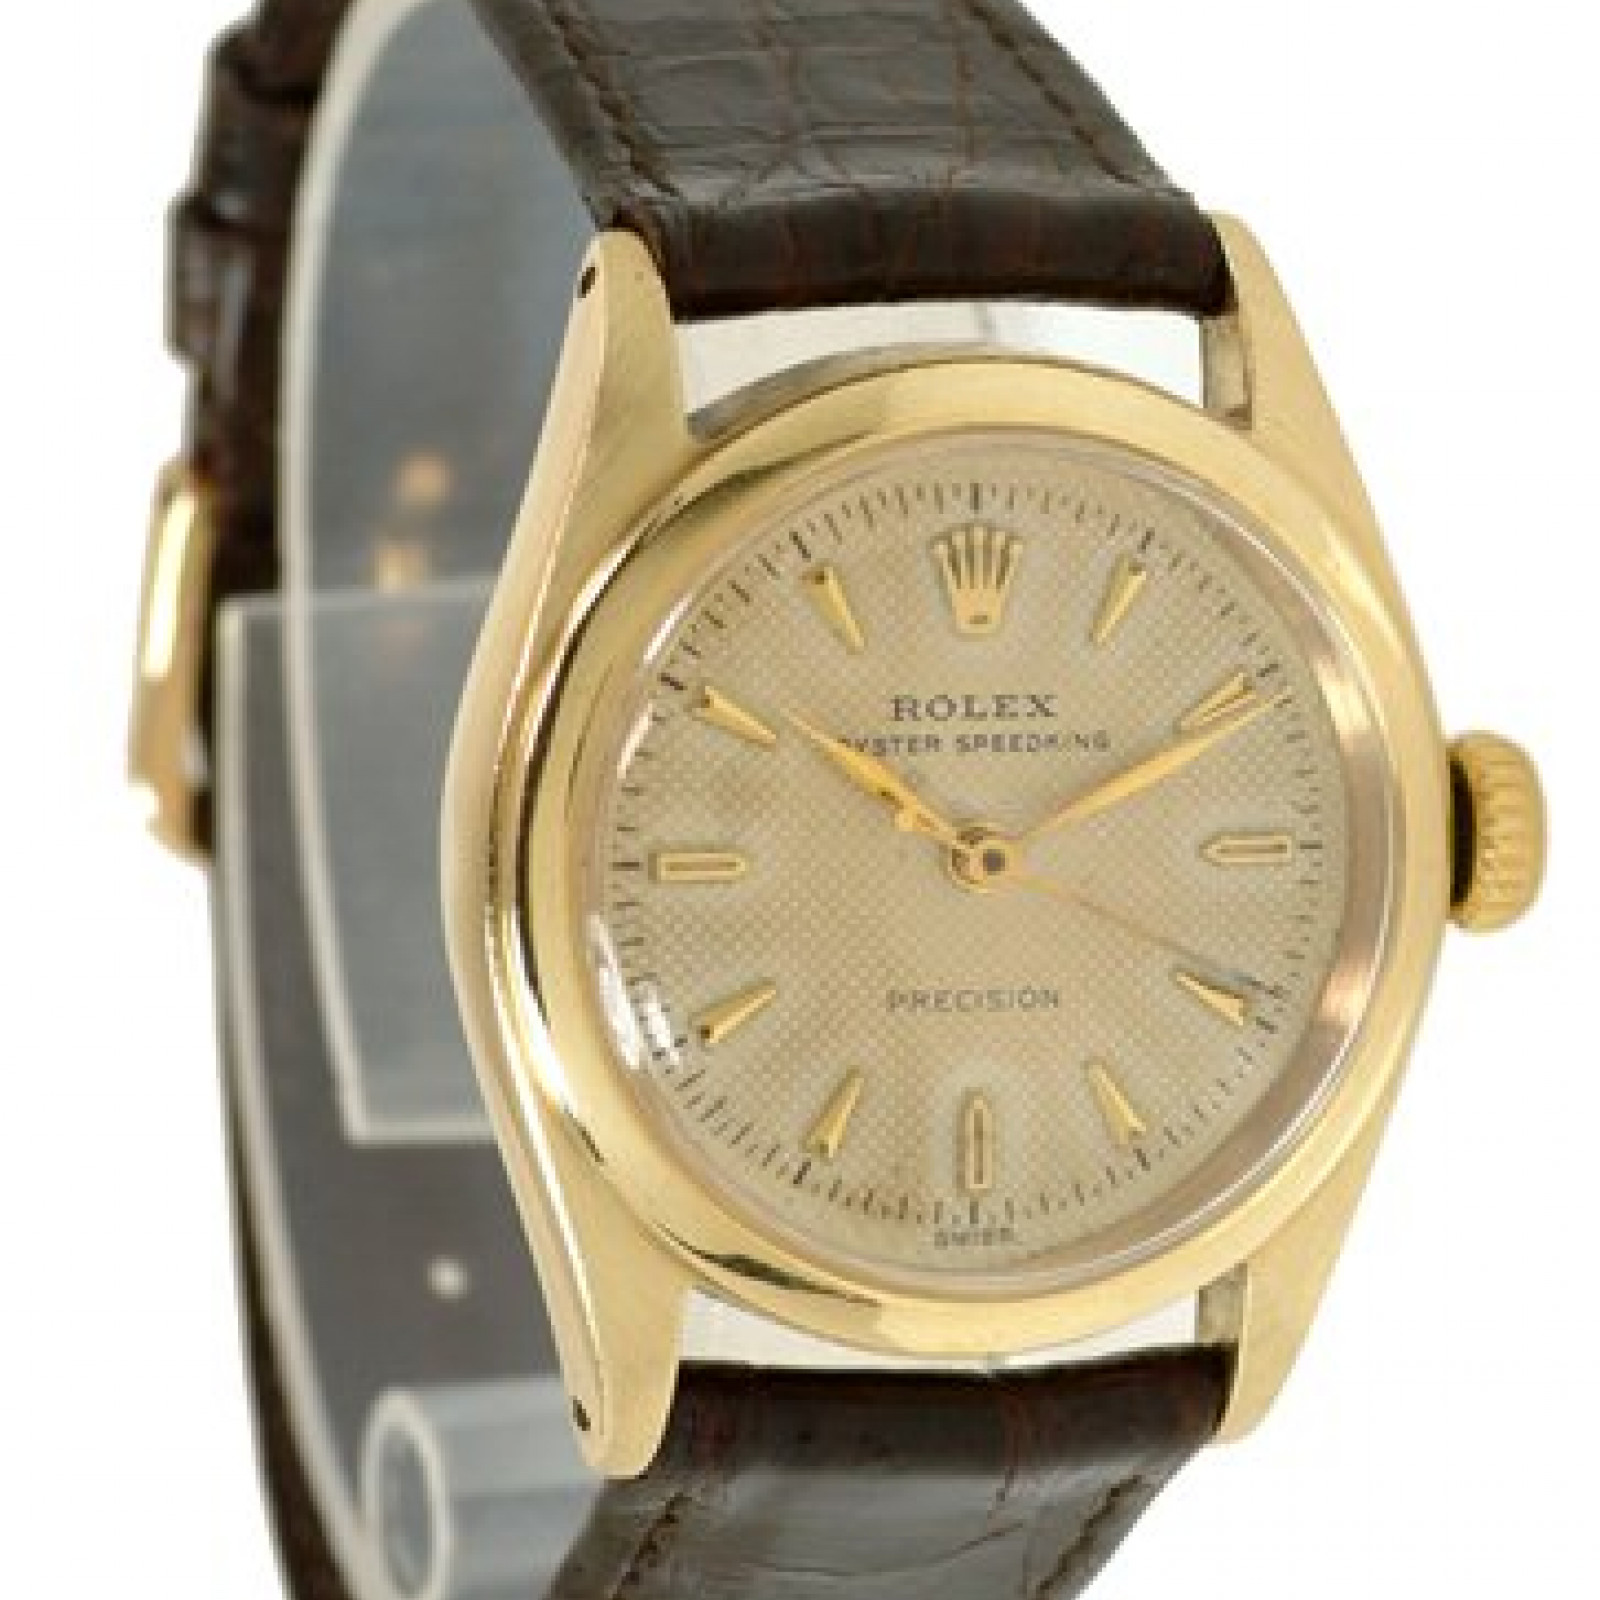 Vintage Rolex Oyster Speedking 6020 Gold with Champagne Dial